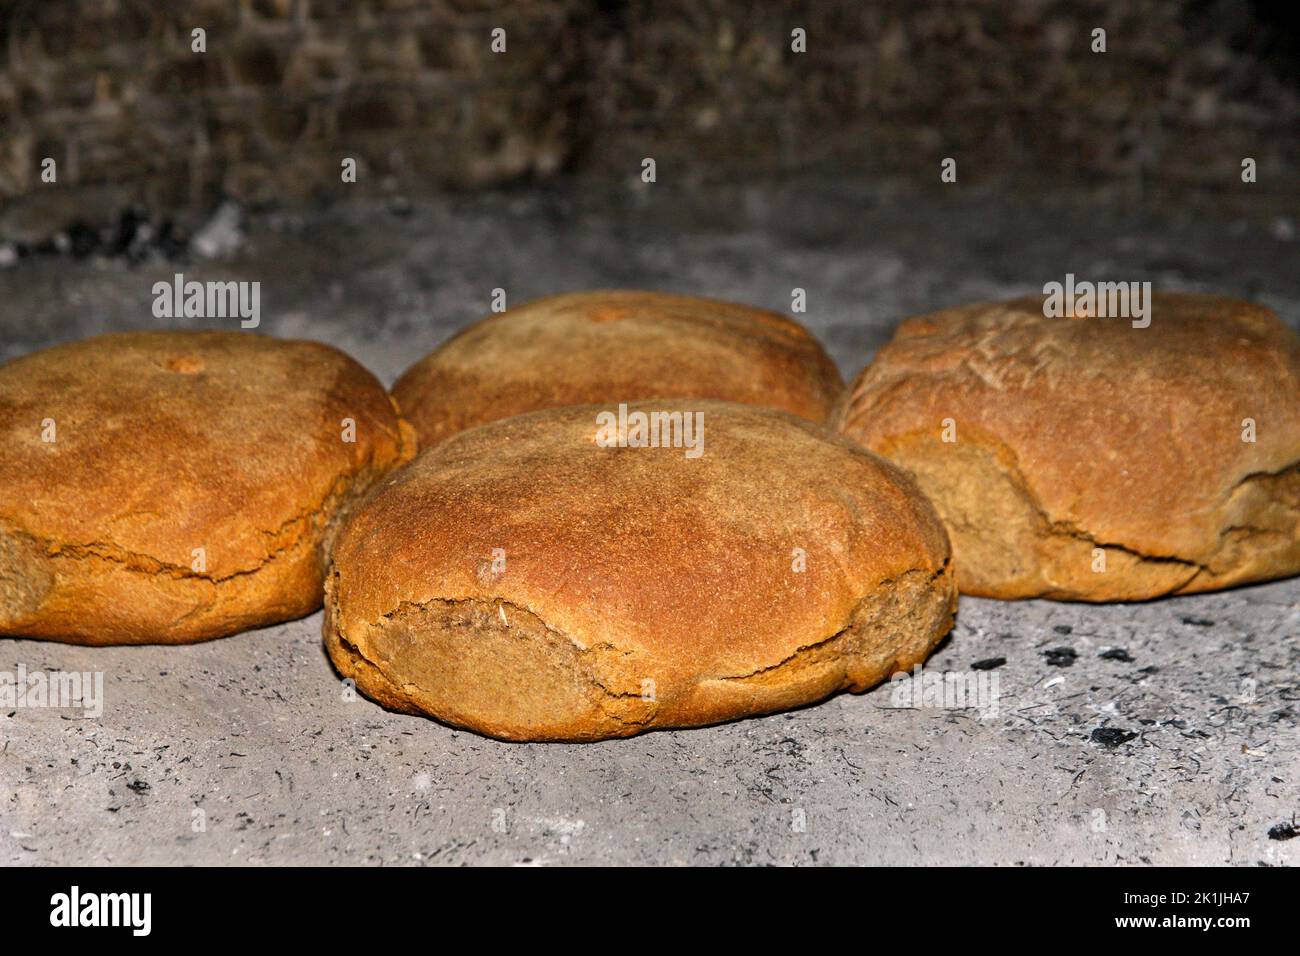 Freshly baked round loafs of bread, a traditional form of making bread in Greece, Europe, especially in provincial places. Stock Photo